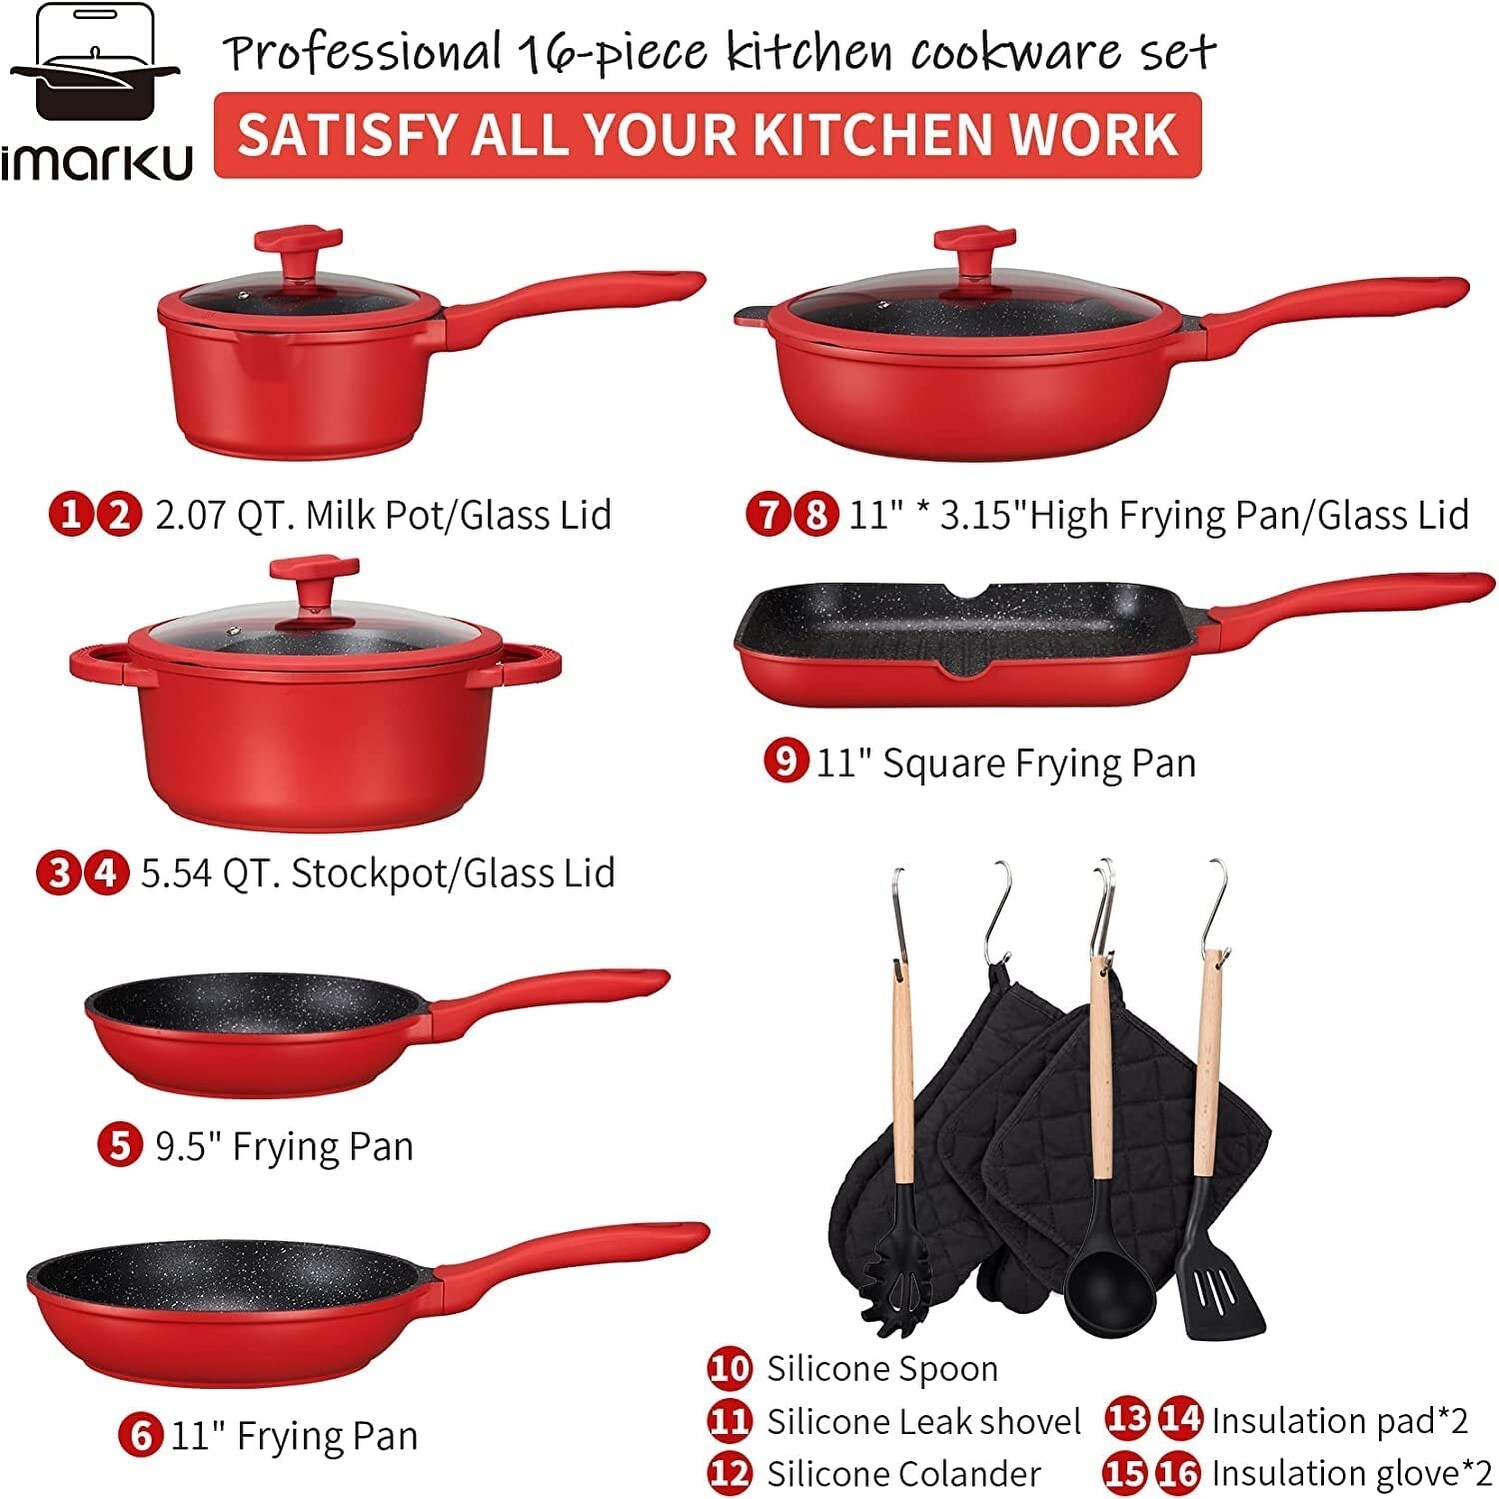 https://ak1.ostkcdn.com/images/products/is/images/direct/9ea79dffc5a187d638d845c1a4c4da0c7952cd10/Pots-and-Pans-Set%2C-Nonstick-16-Pieces%2C-Cookware-Sets-with-Granite-Coating%2C-Kitchen-Cookware-Set-Suitable-for-All-Cooktop.jpg